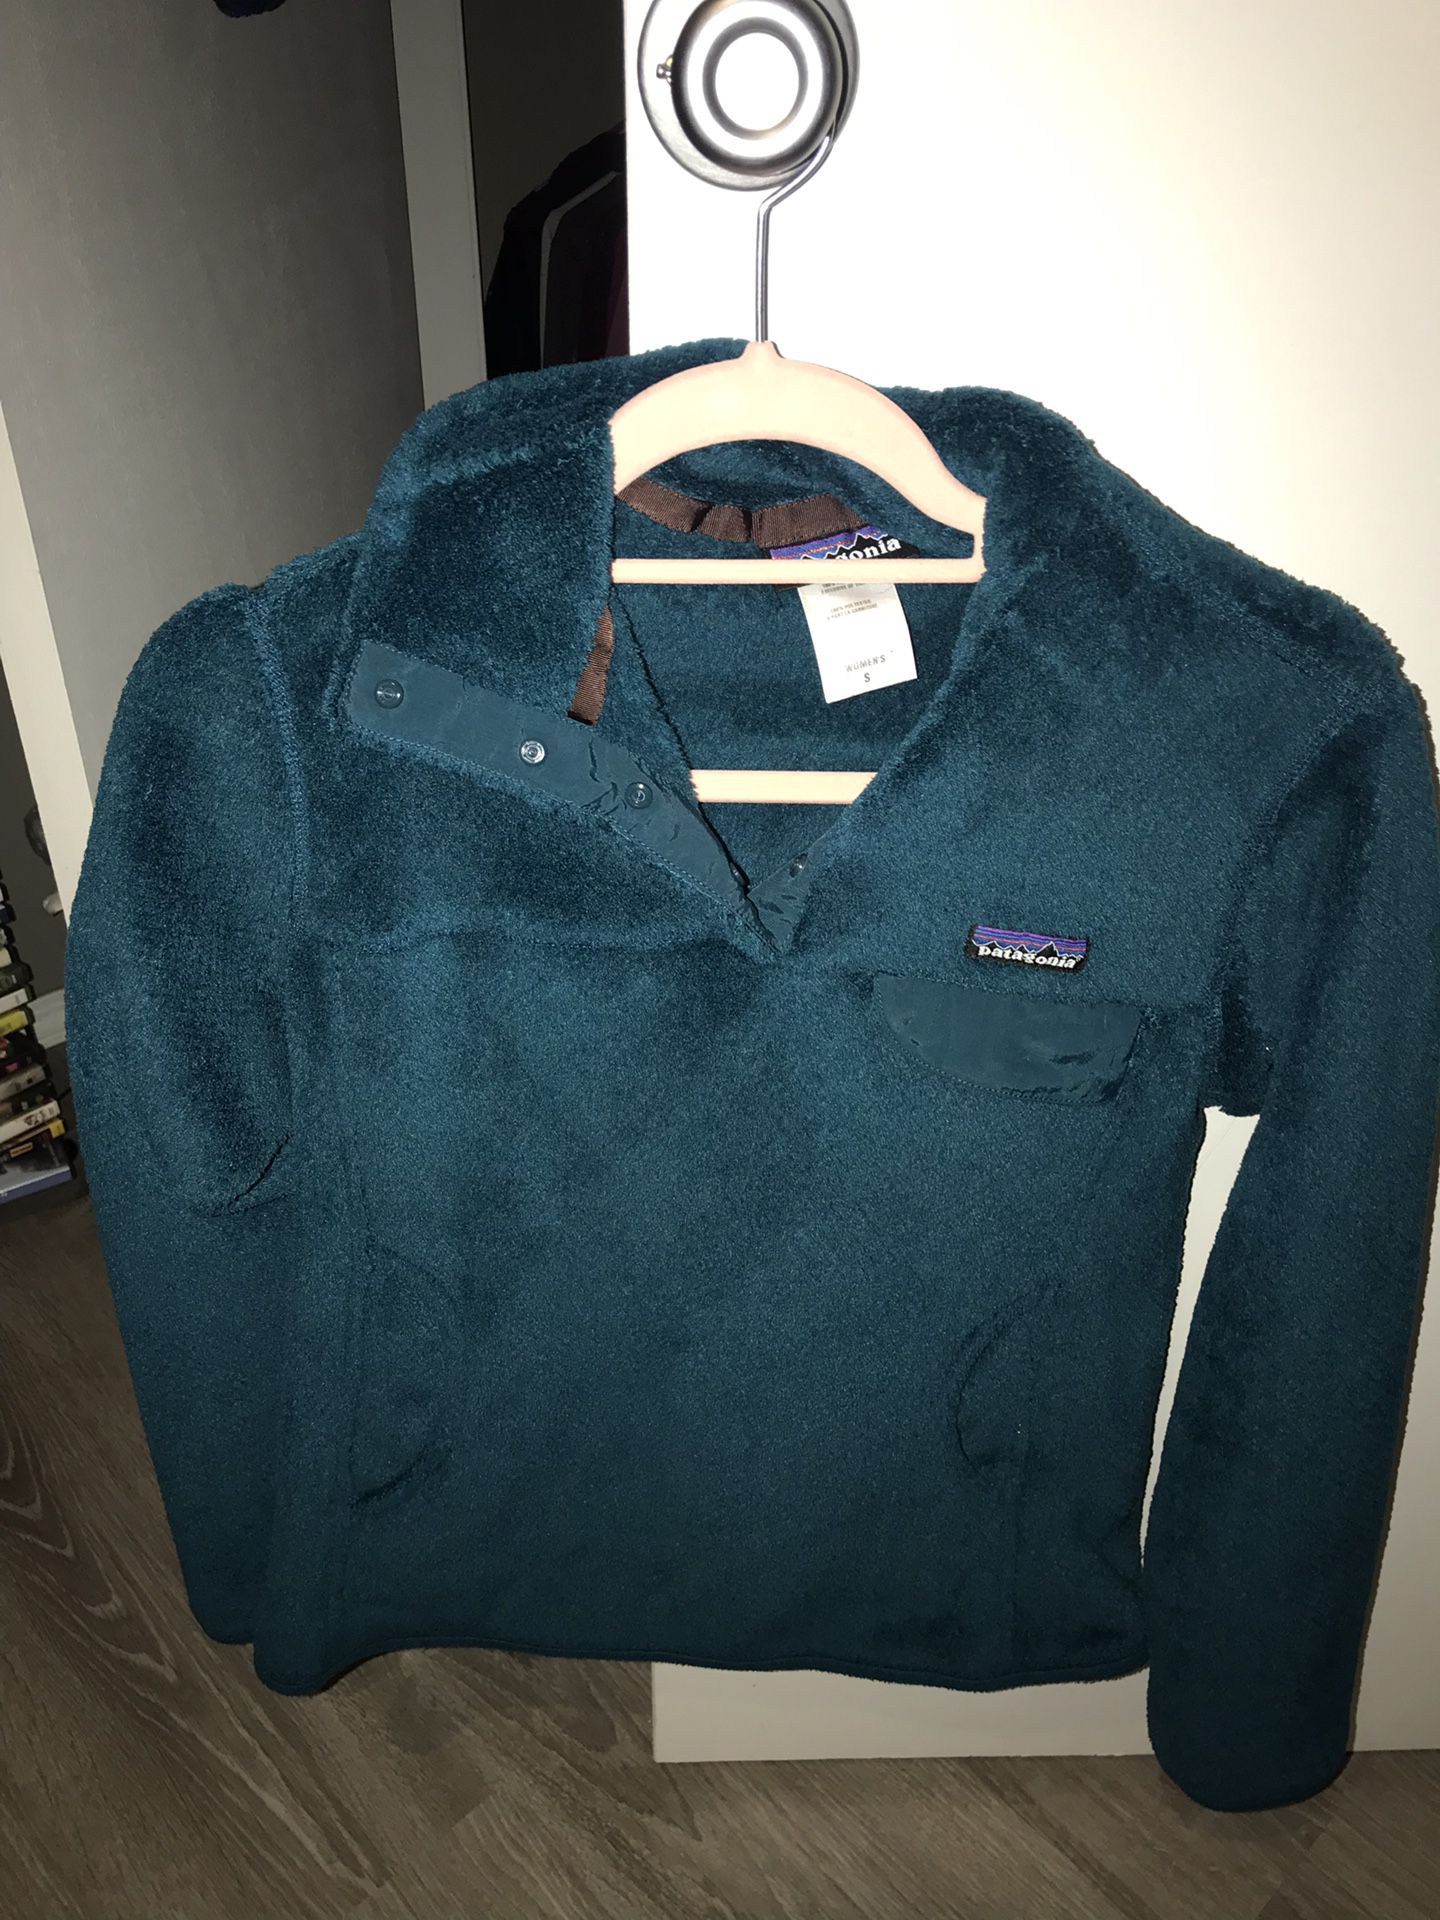 Patagonia women’s fleece pullover, size small